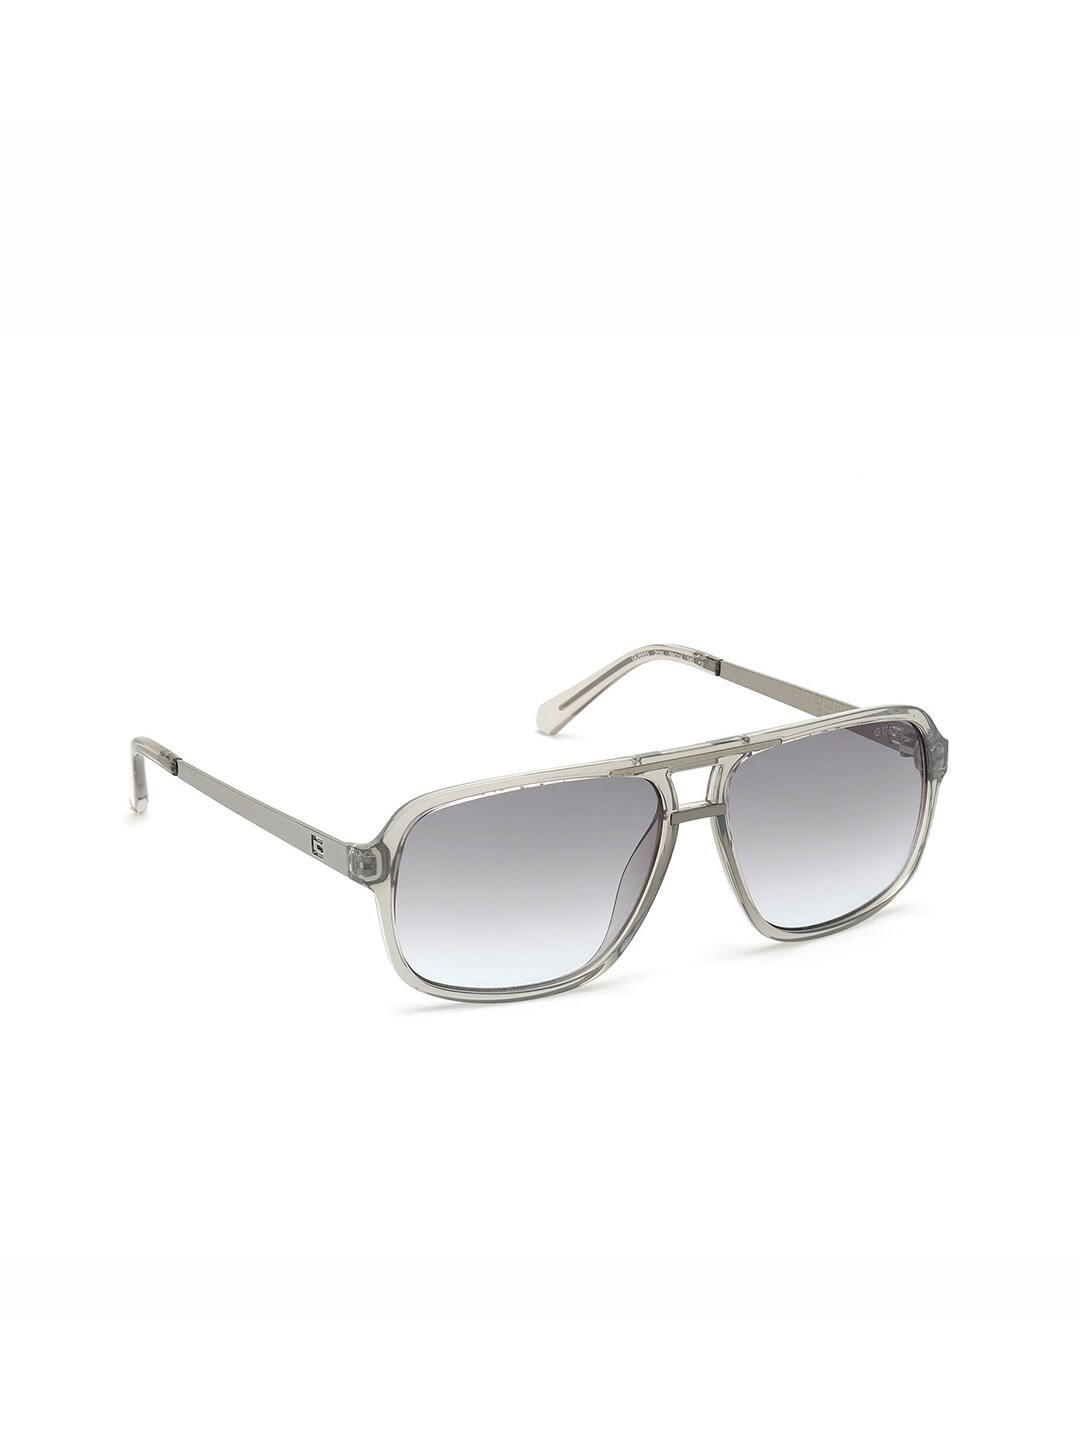 GUESS Unisex Grey Lens & Silver-Toned Square Sunglasses with UV Protected Lens Price in India